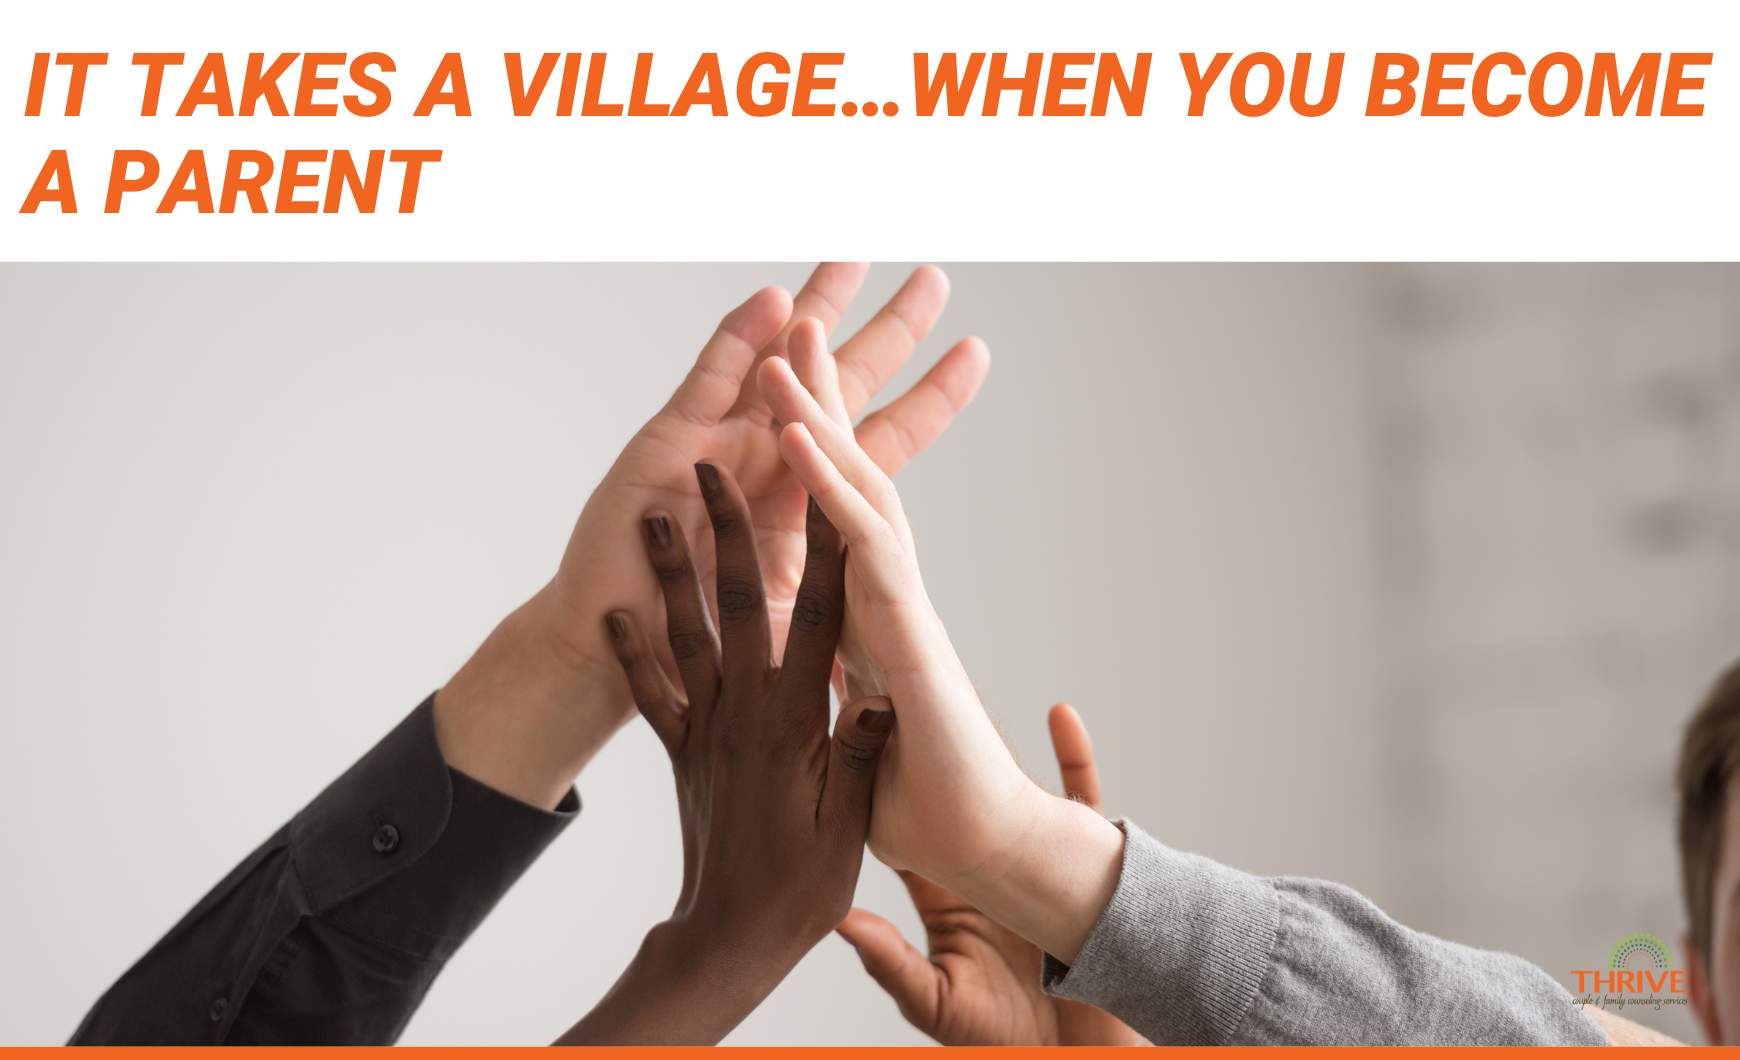 Dark orange text that reads "It Takes A Village...When You Become A Parent" above a stock photo of a group of people's hands high fiving.